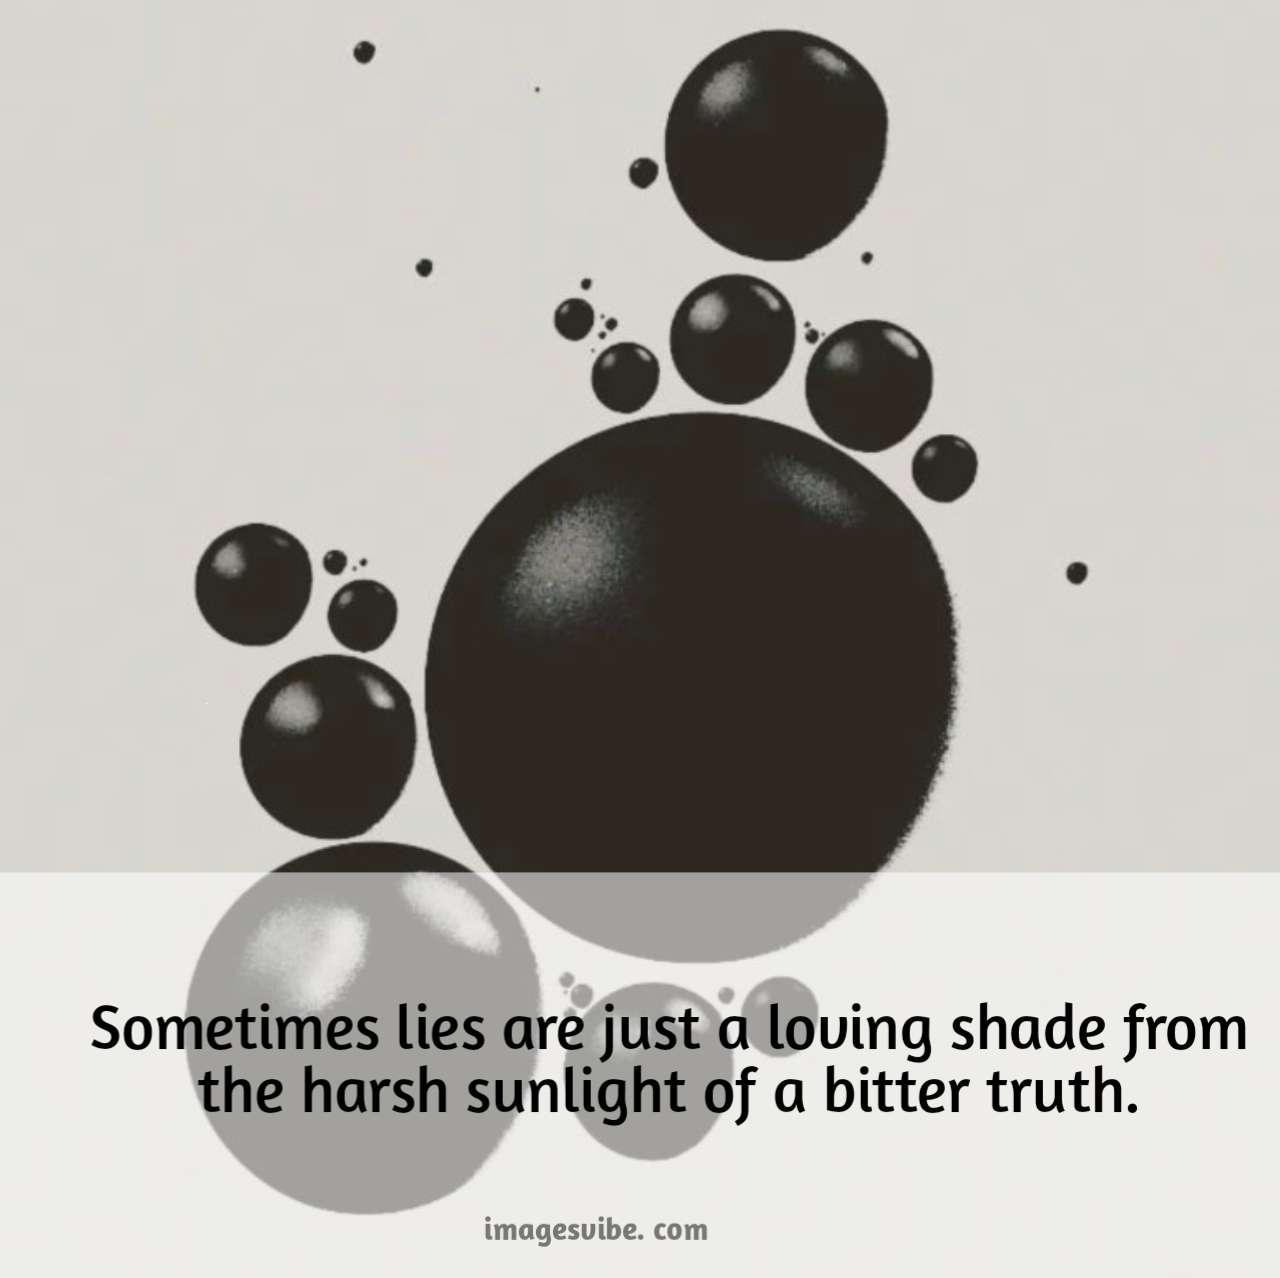 Images With About Lies21 